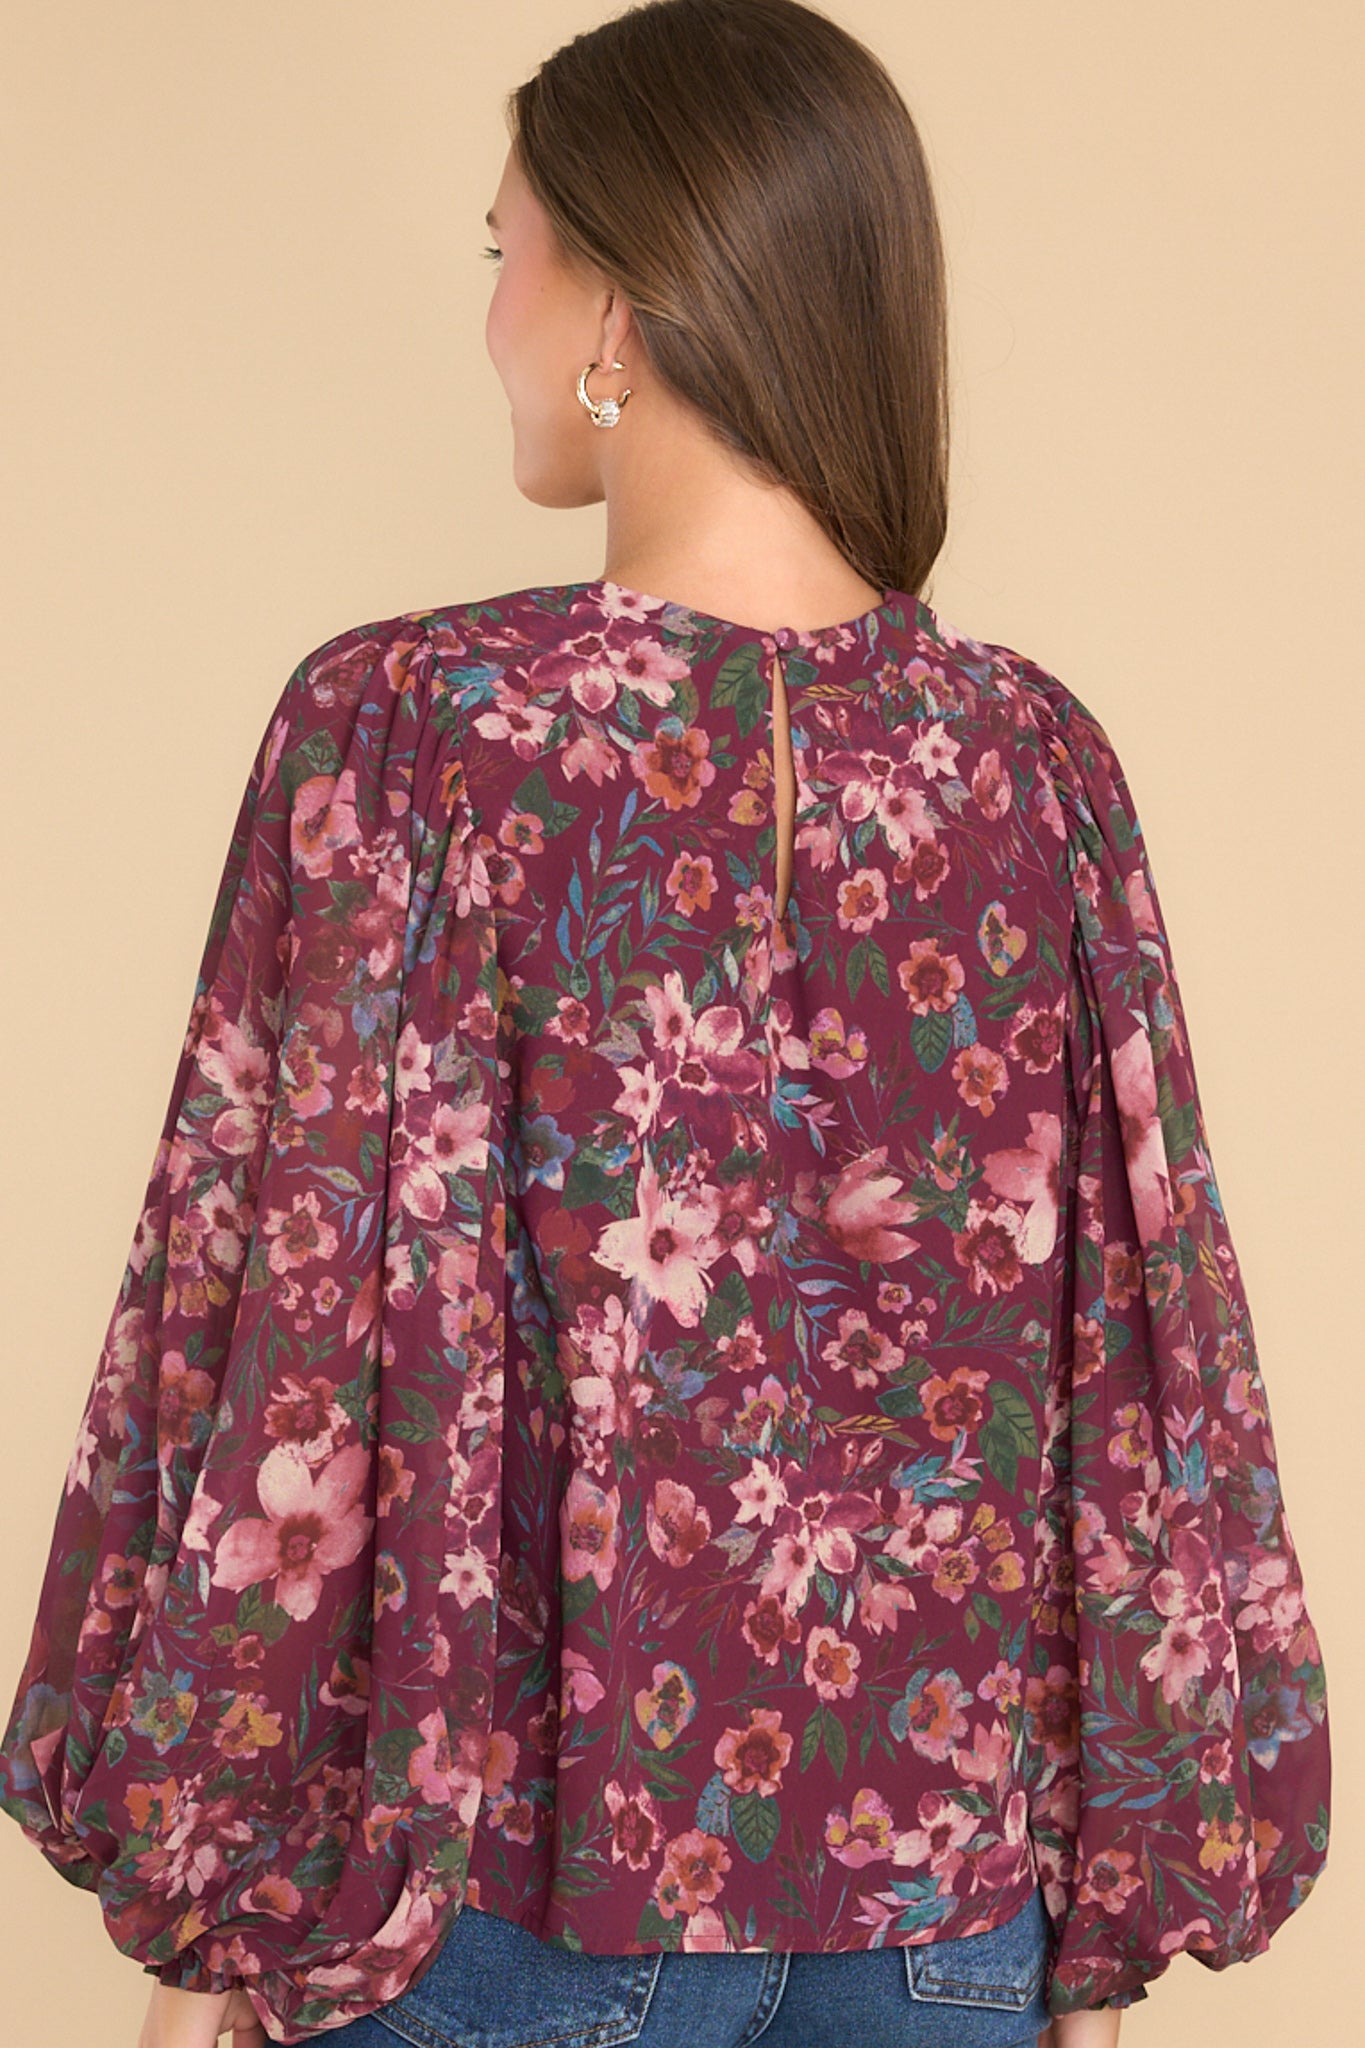 Back view of this top that features a scoop neckline, flowy balloon sleeves with elastic around the cuff, key hole back with a button closure, and a relaxed fit.